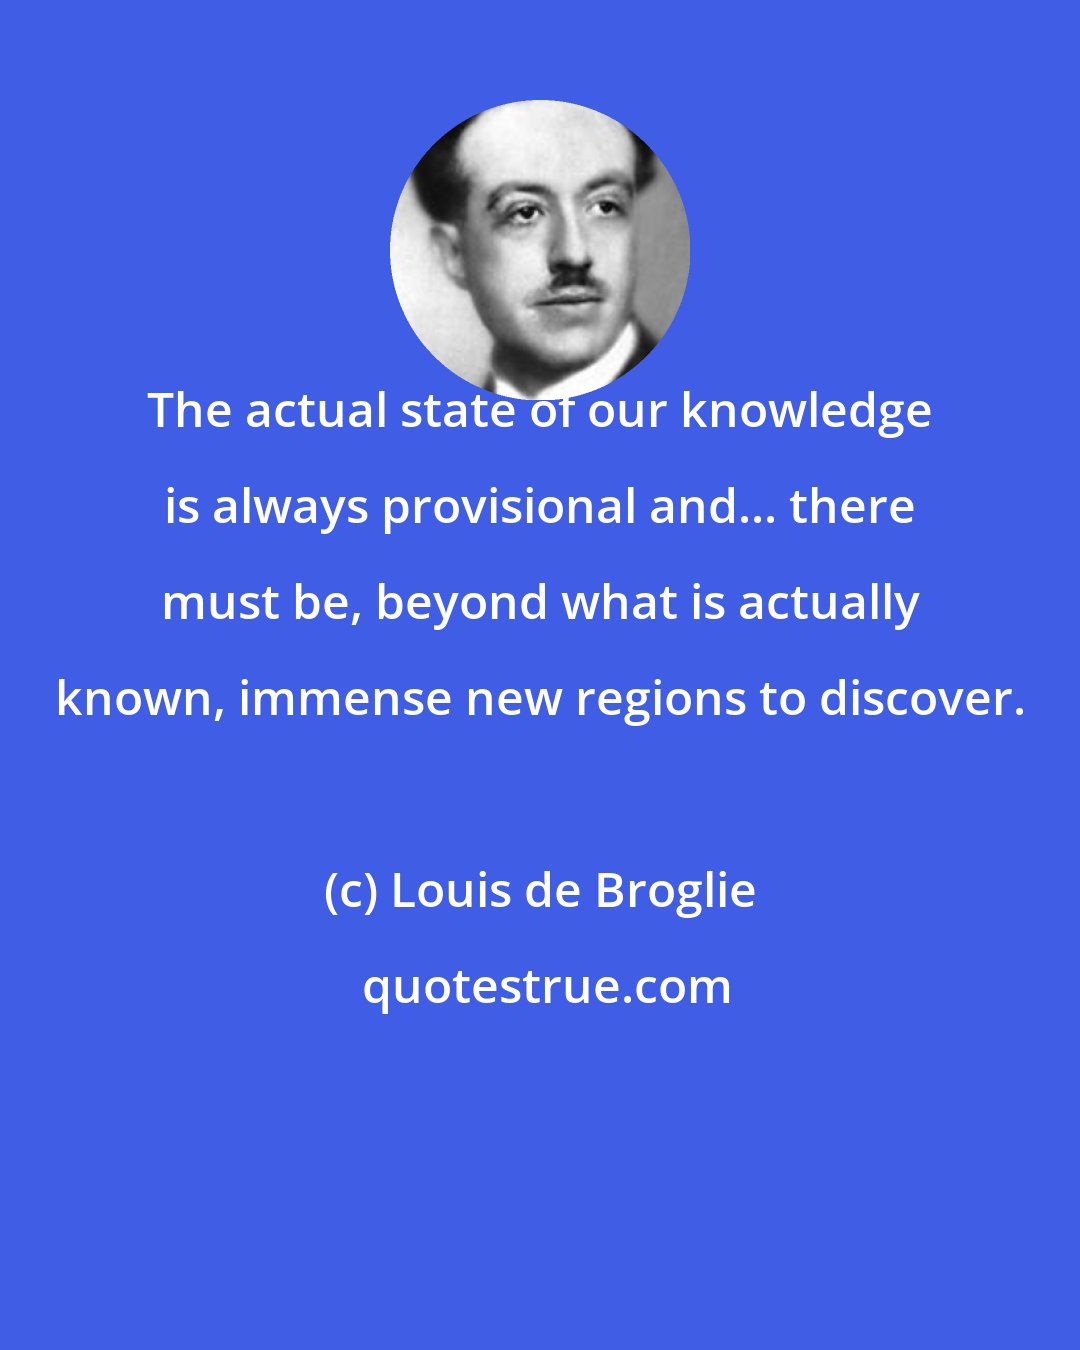 Louis de Broglie: The actual state of our knowledge is always provisional and... there must be, beyond what is actually known, immense new regions to discover.